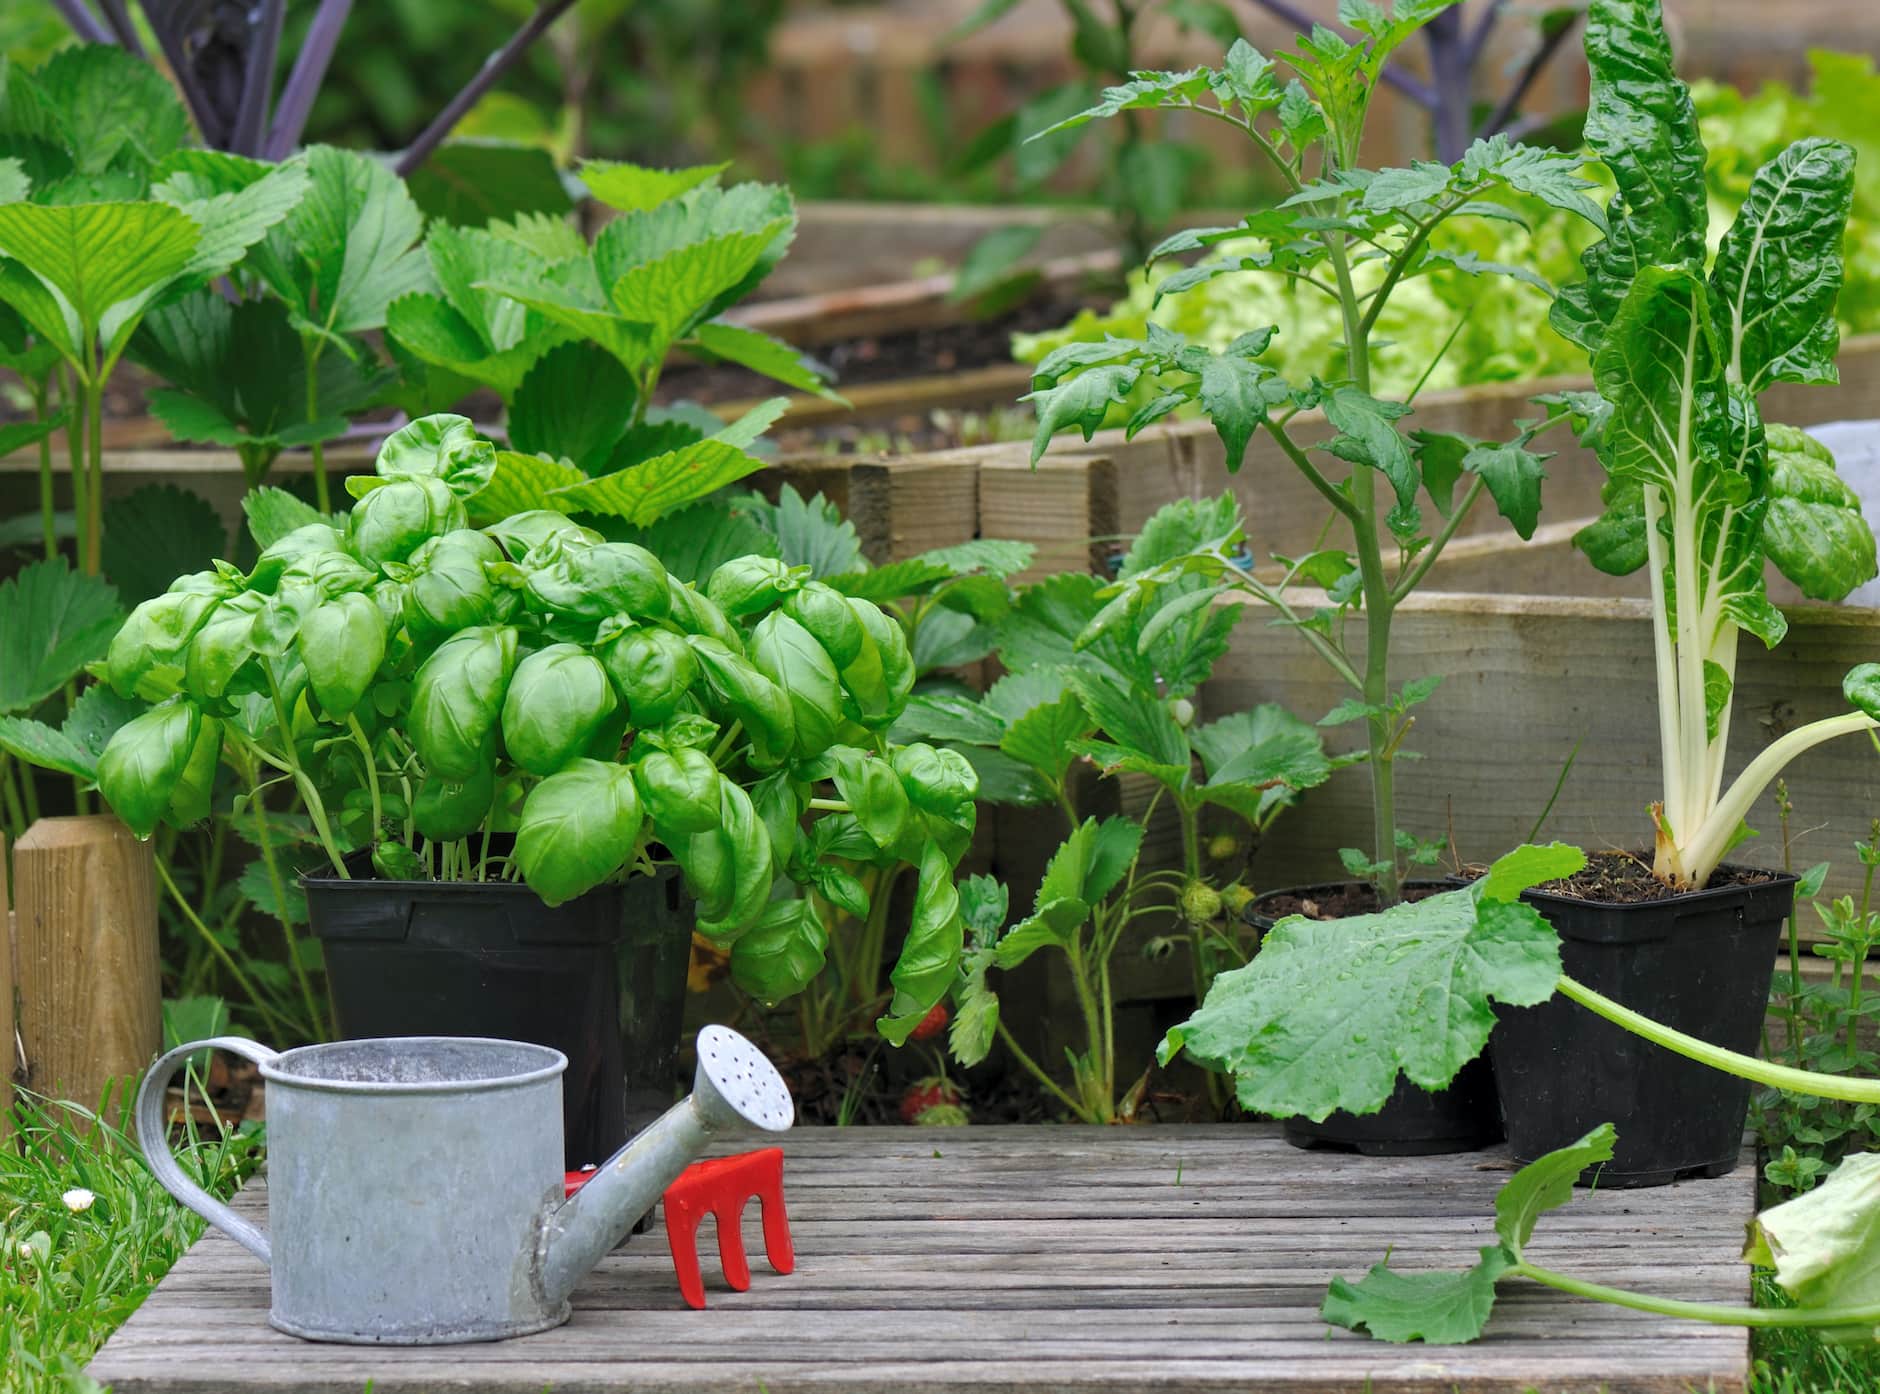 Keeping Critters Away from Your Potted Garden | Solutions for Deterring Unwanted Digging